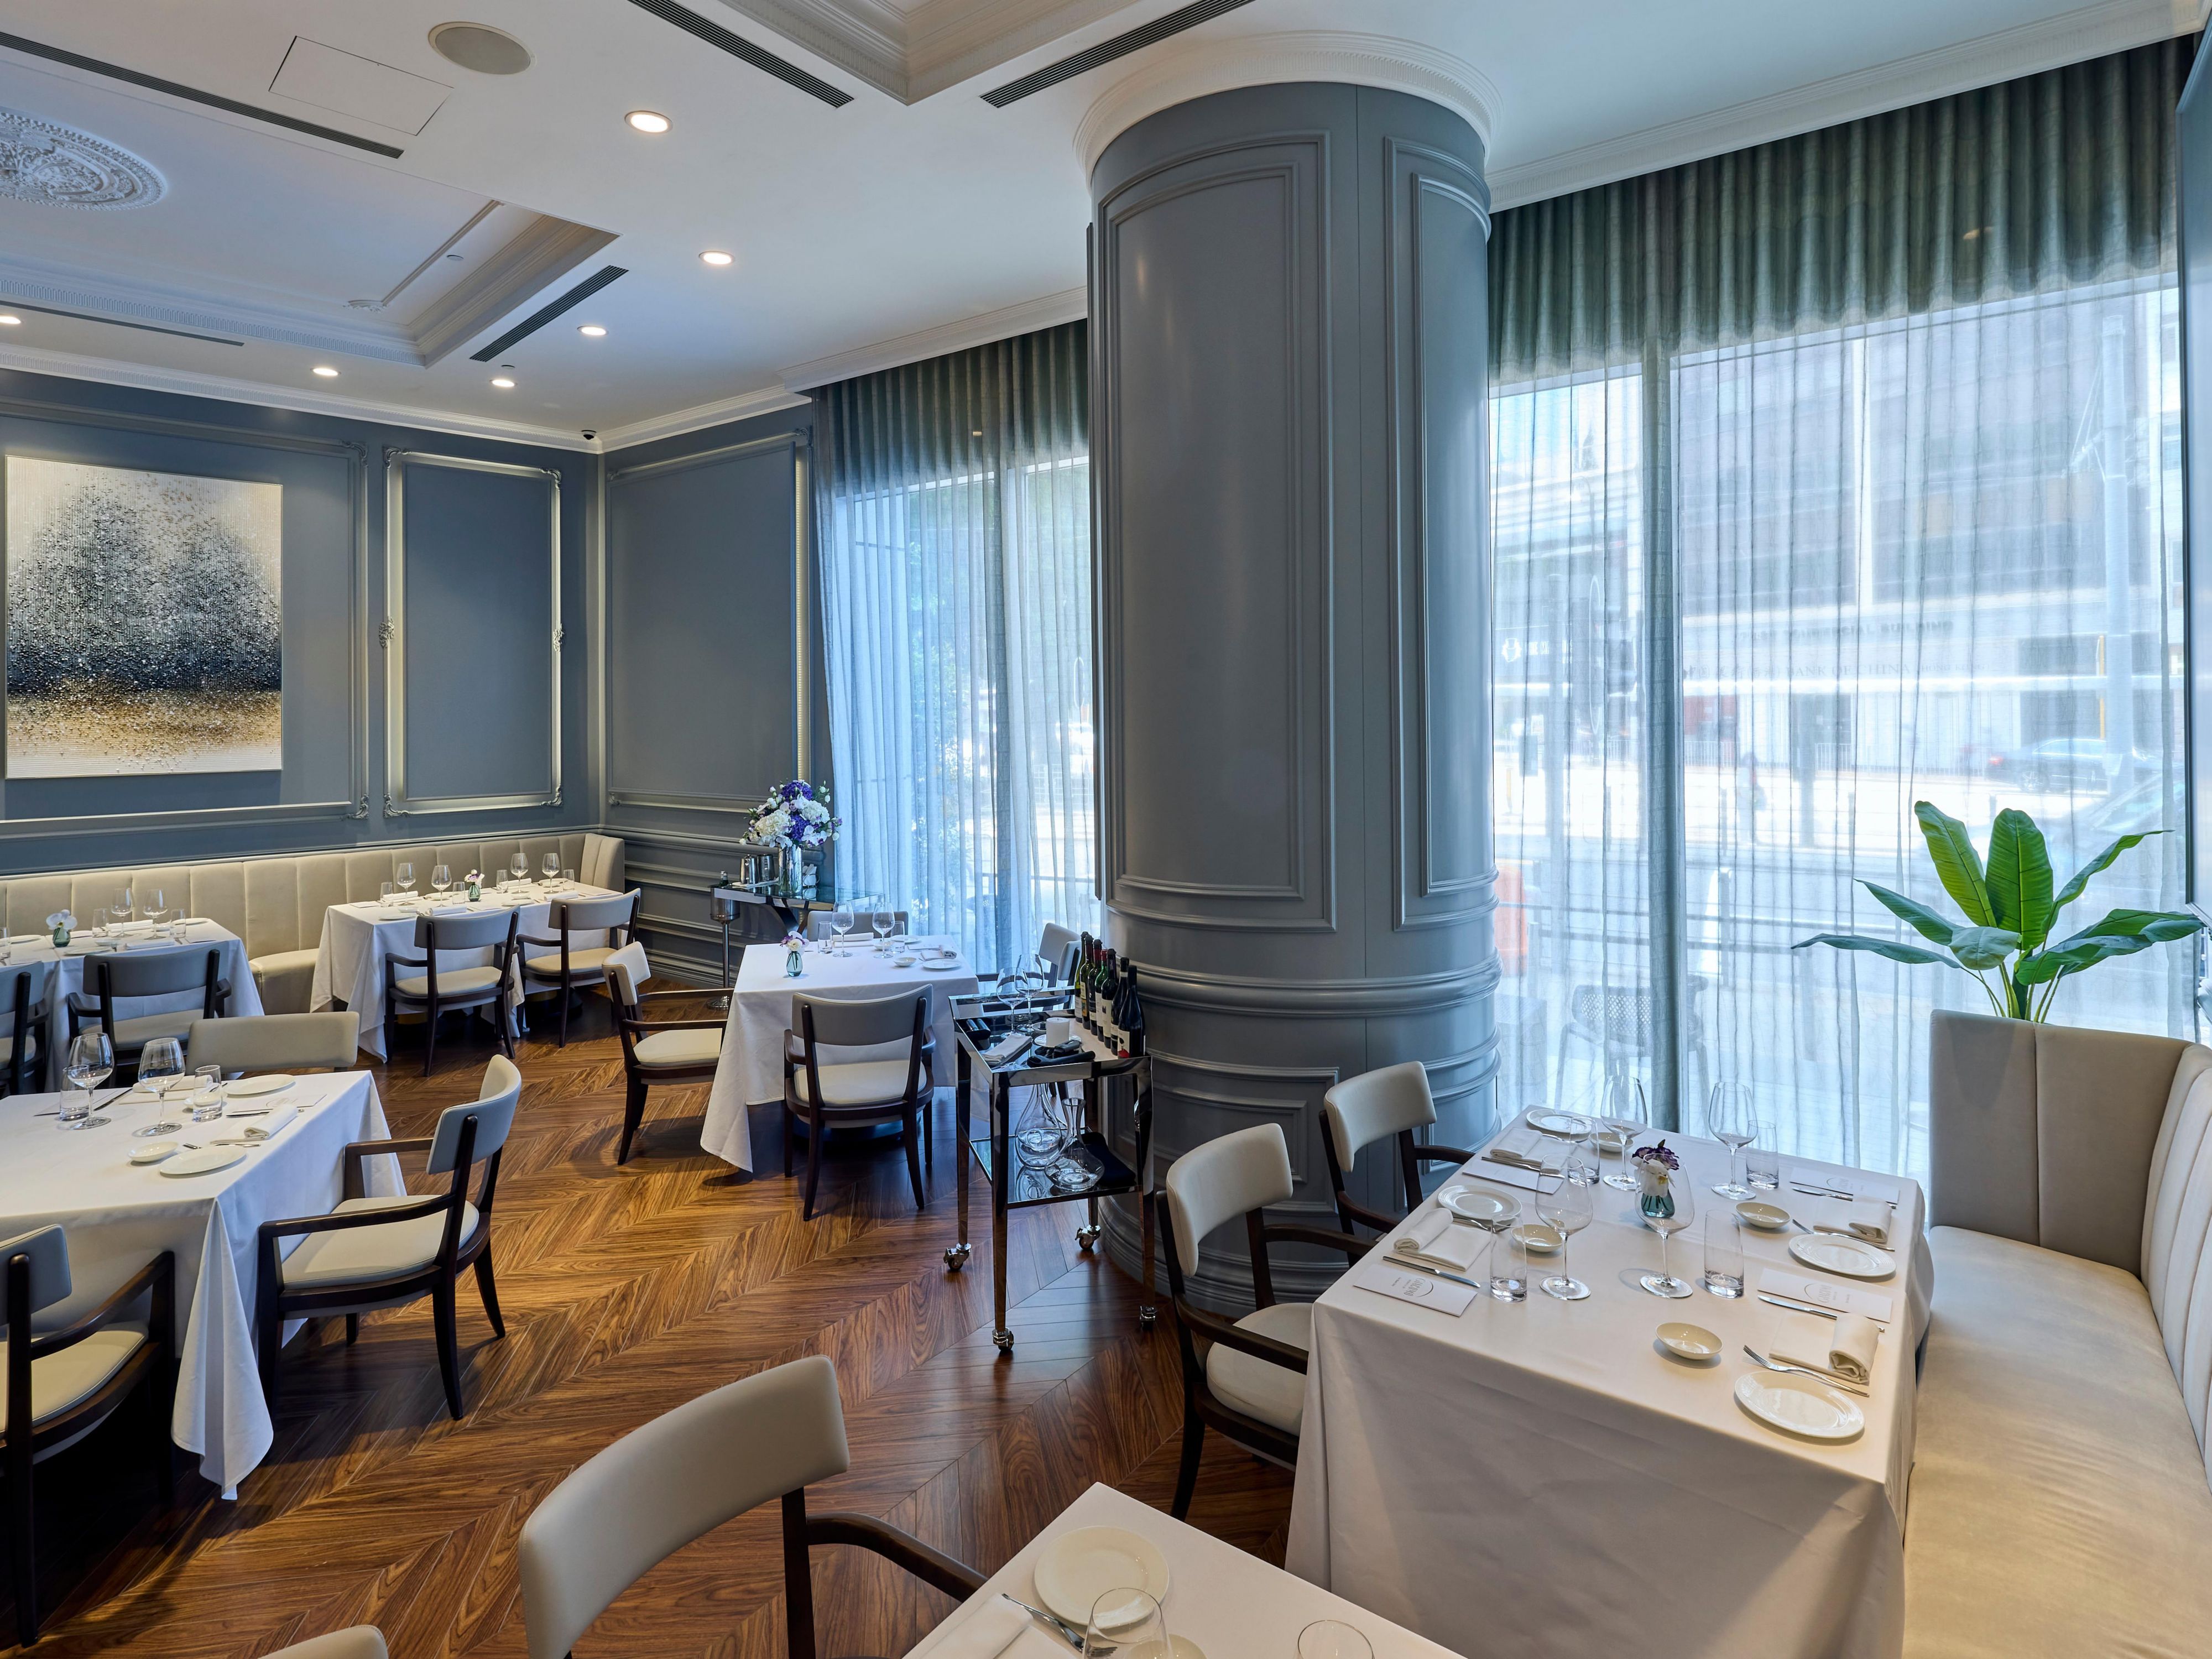 Founded by the Michelin chef in town, delivering unique, sophistical and contemporary culinary delights. GIACOMO invites connoisseurs to embark on an exquisite gastronomic journey inspired by the light and refreshing flavors of Southern Italy.